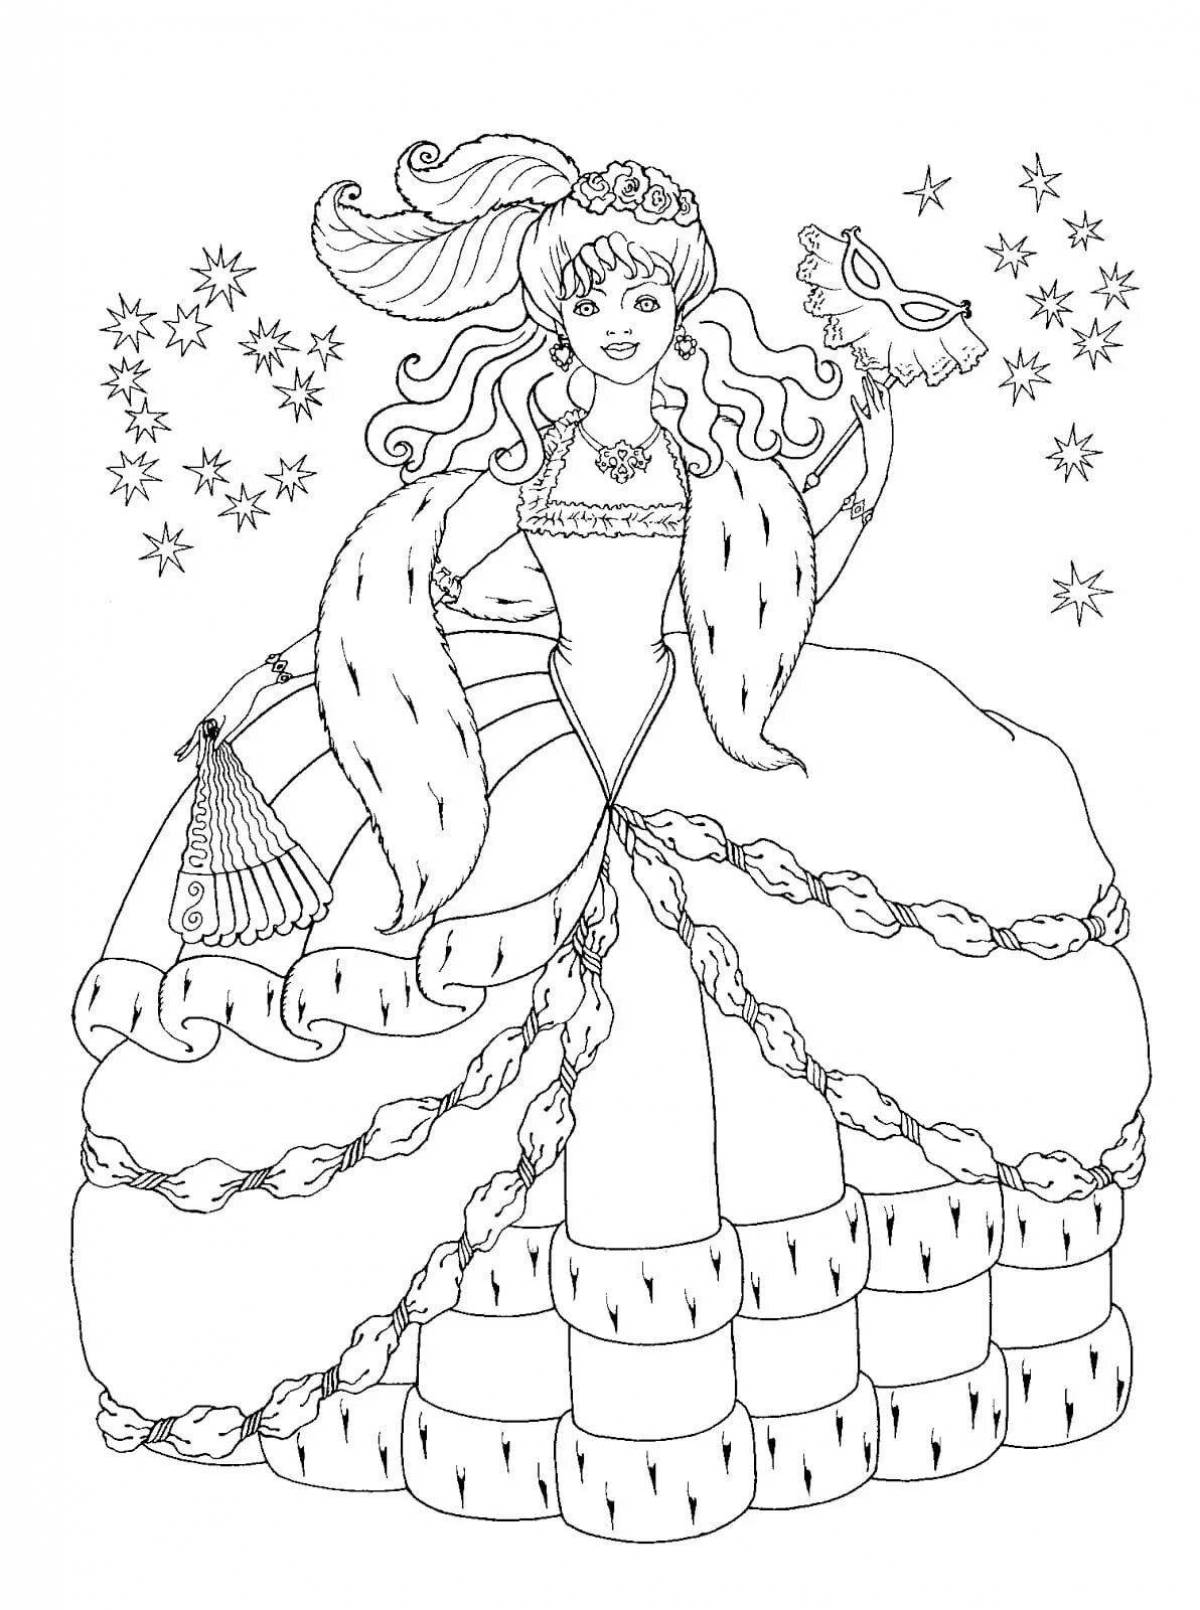 Cute princess coloring pages for girls 6 years old